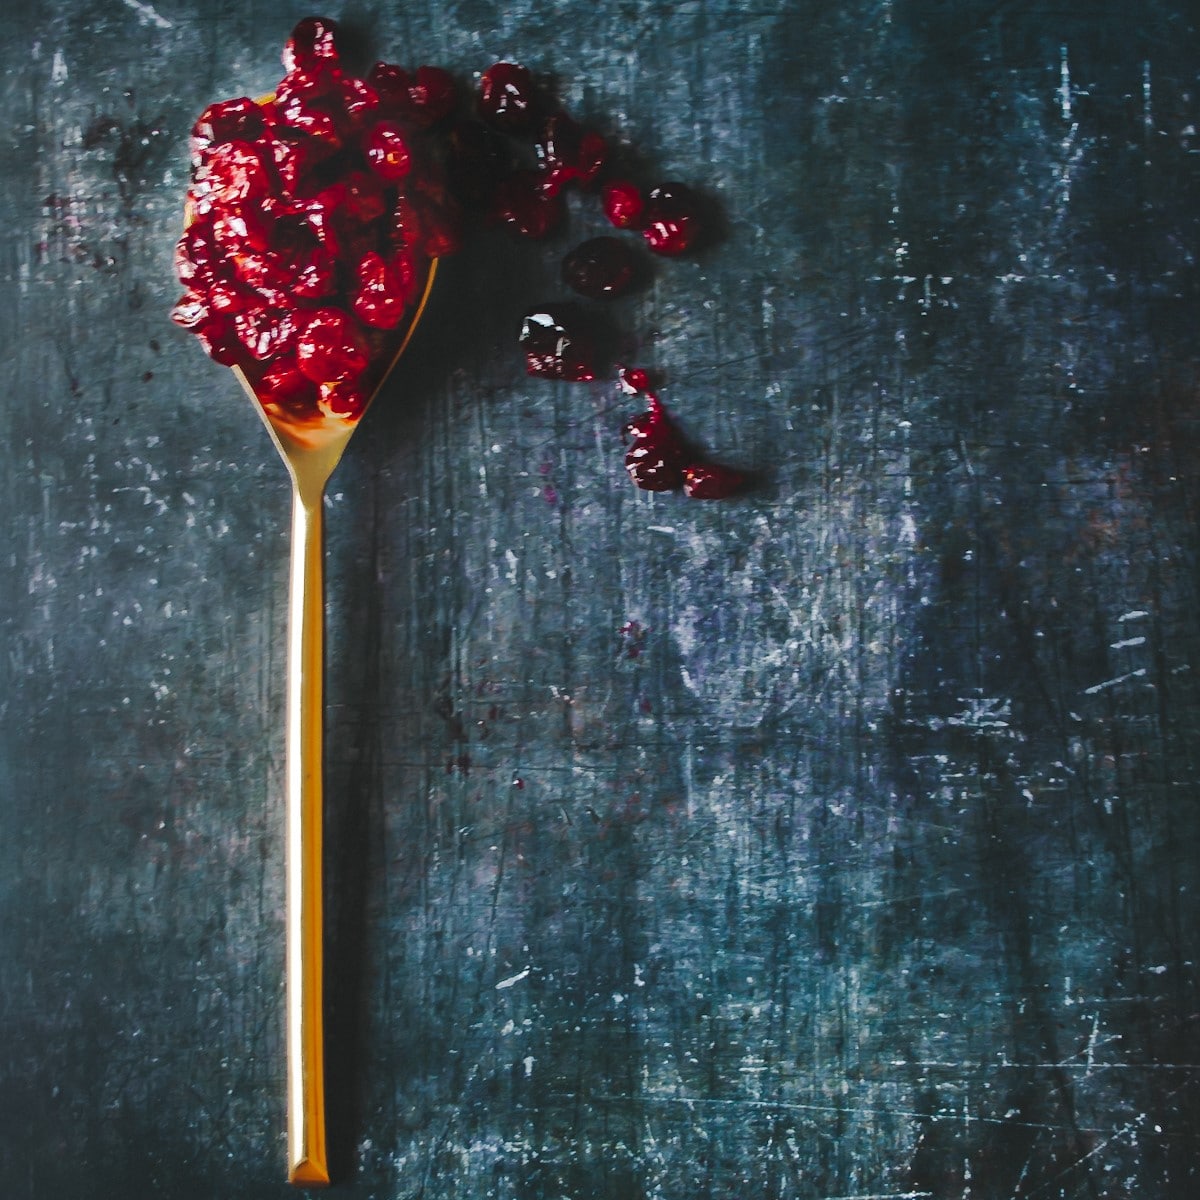 cranberries roasted on a spoon for chocolate tart with cranberries